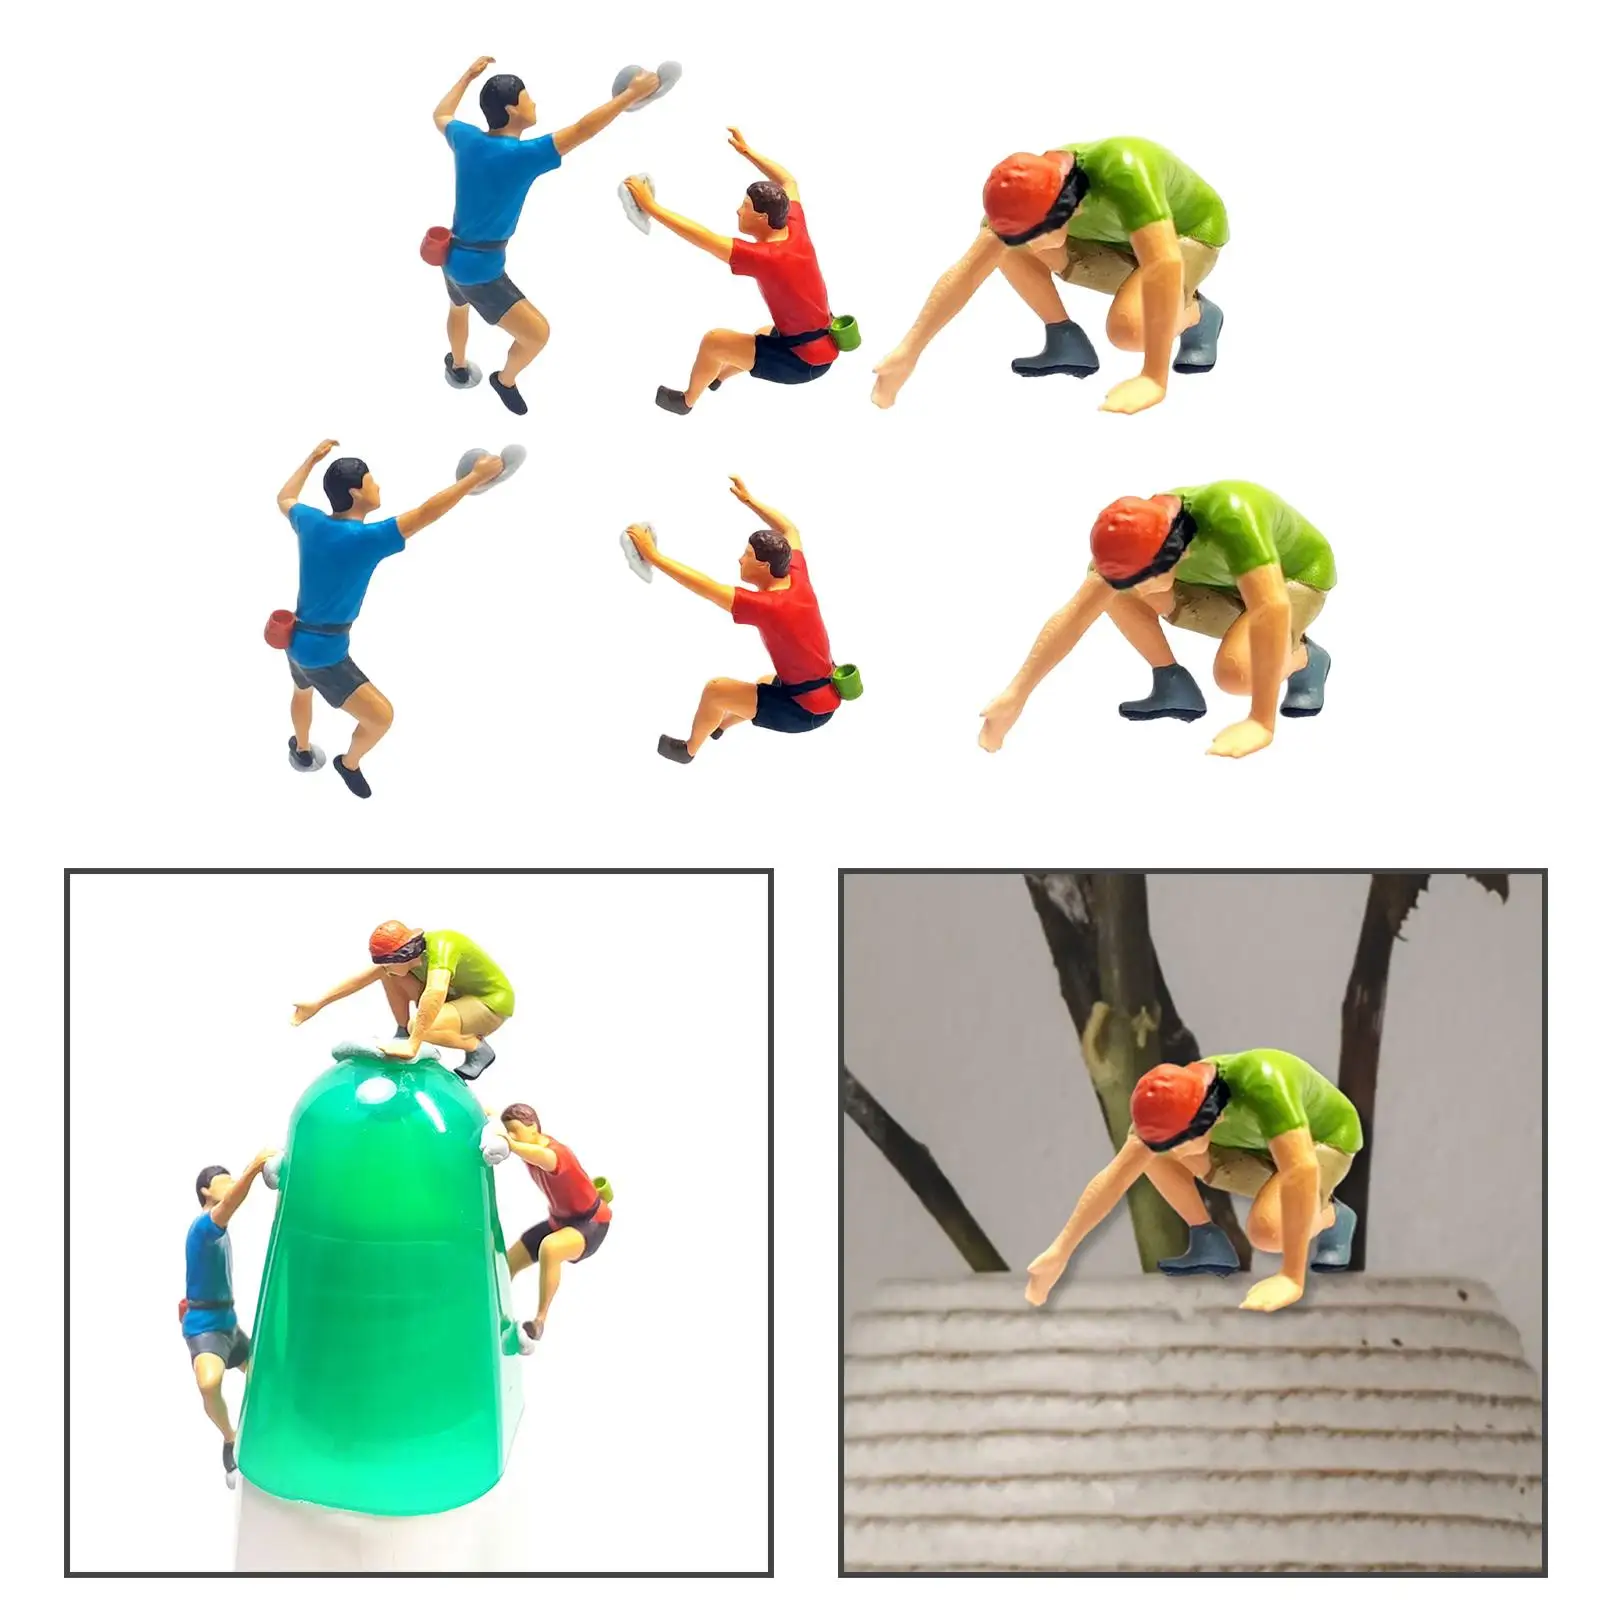 Resin 1/64 Rock Climbing Figures Miniature DIY Projects Micro Landscape Diorama Scenery Fairy Garden Layout Collections Decor